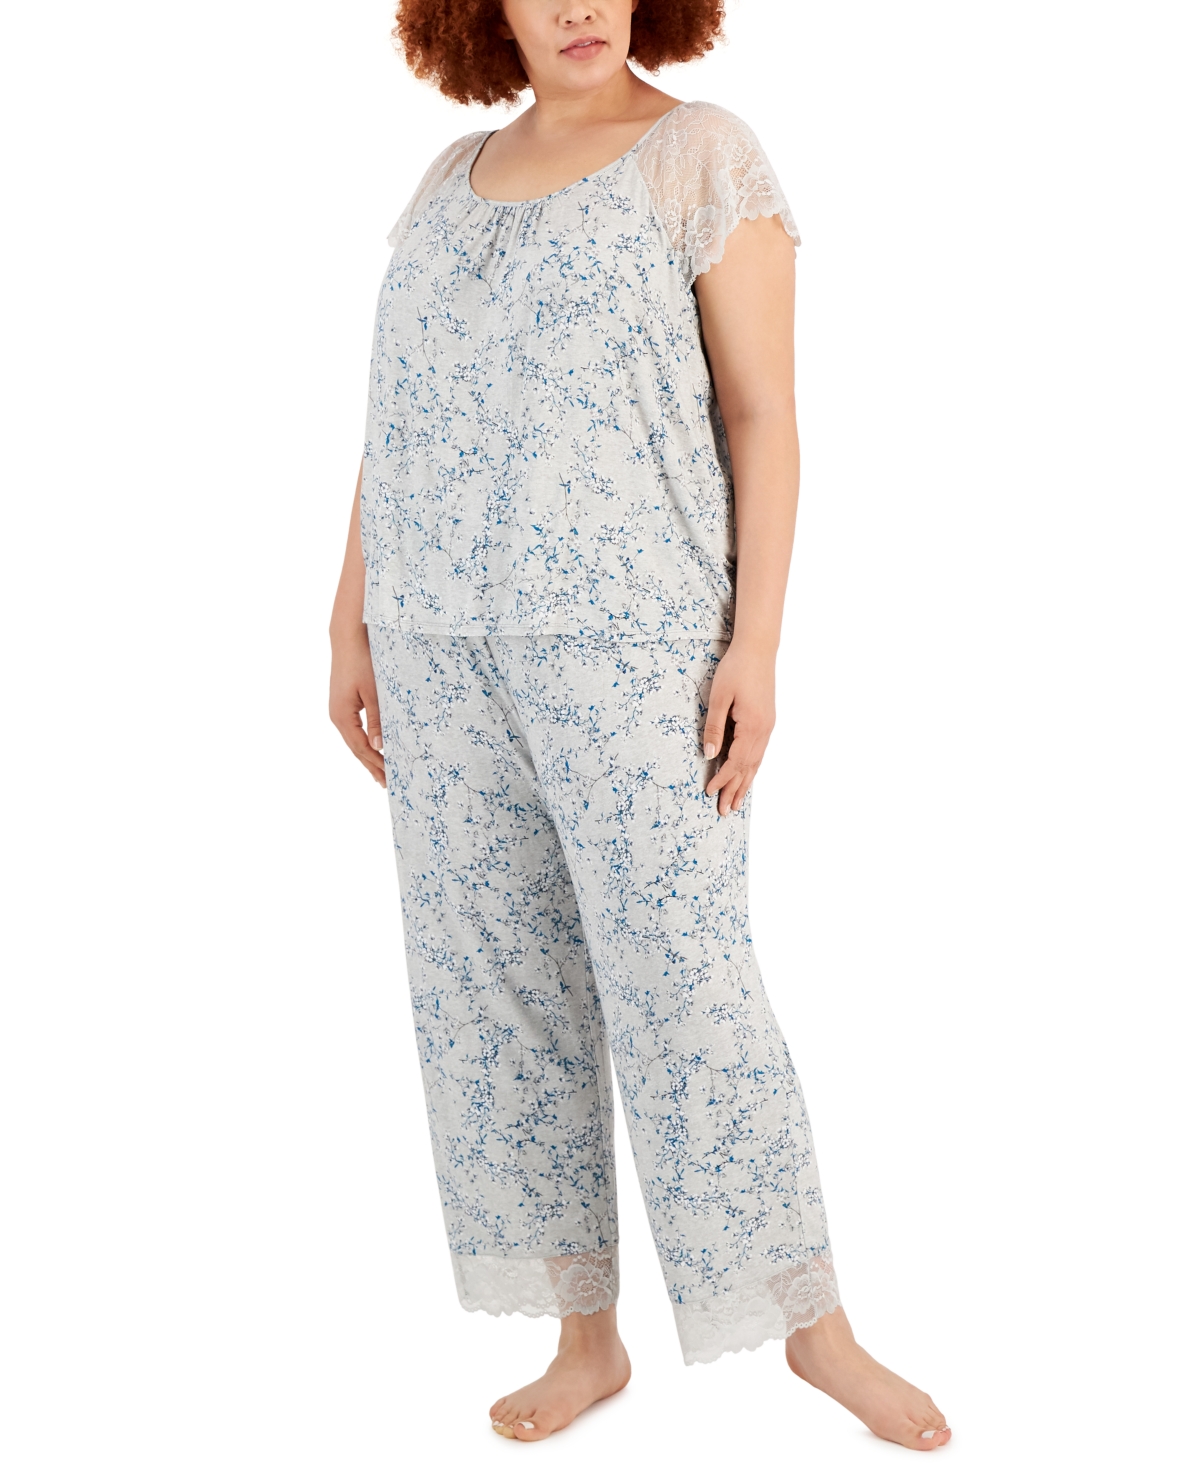 Charter Club Plus Size Lace-Trim Pajama Set, Created for Macy's